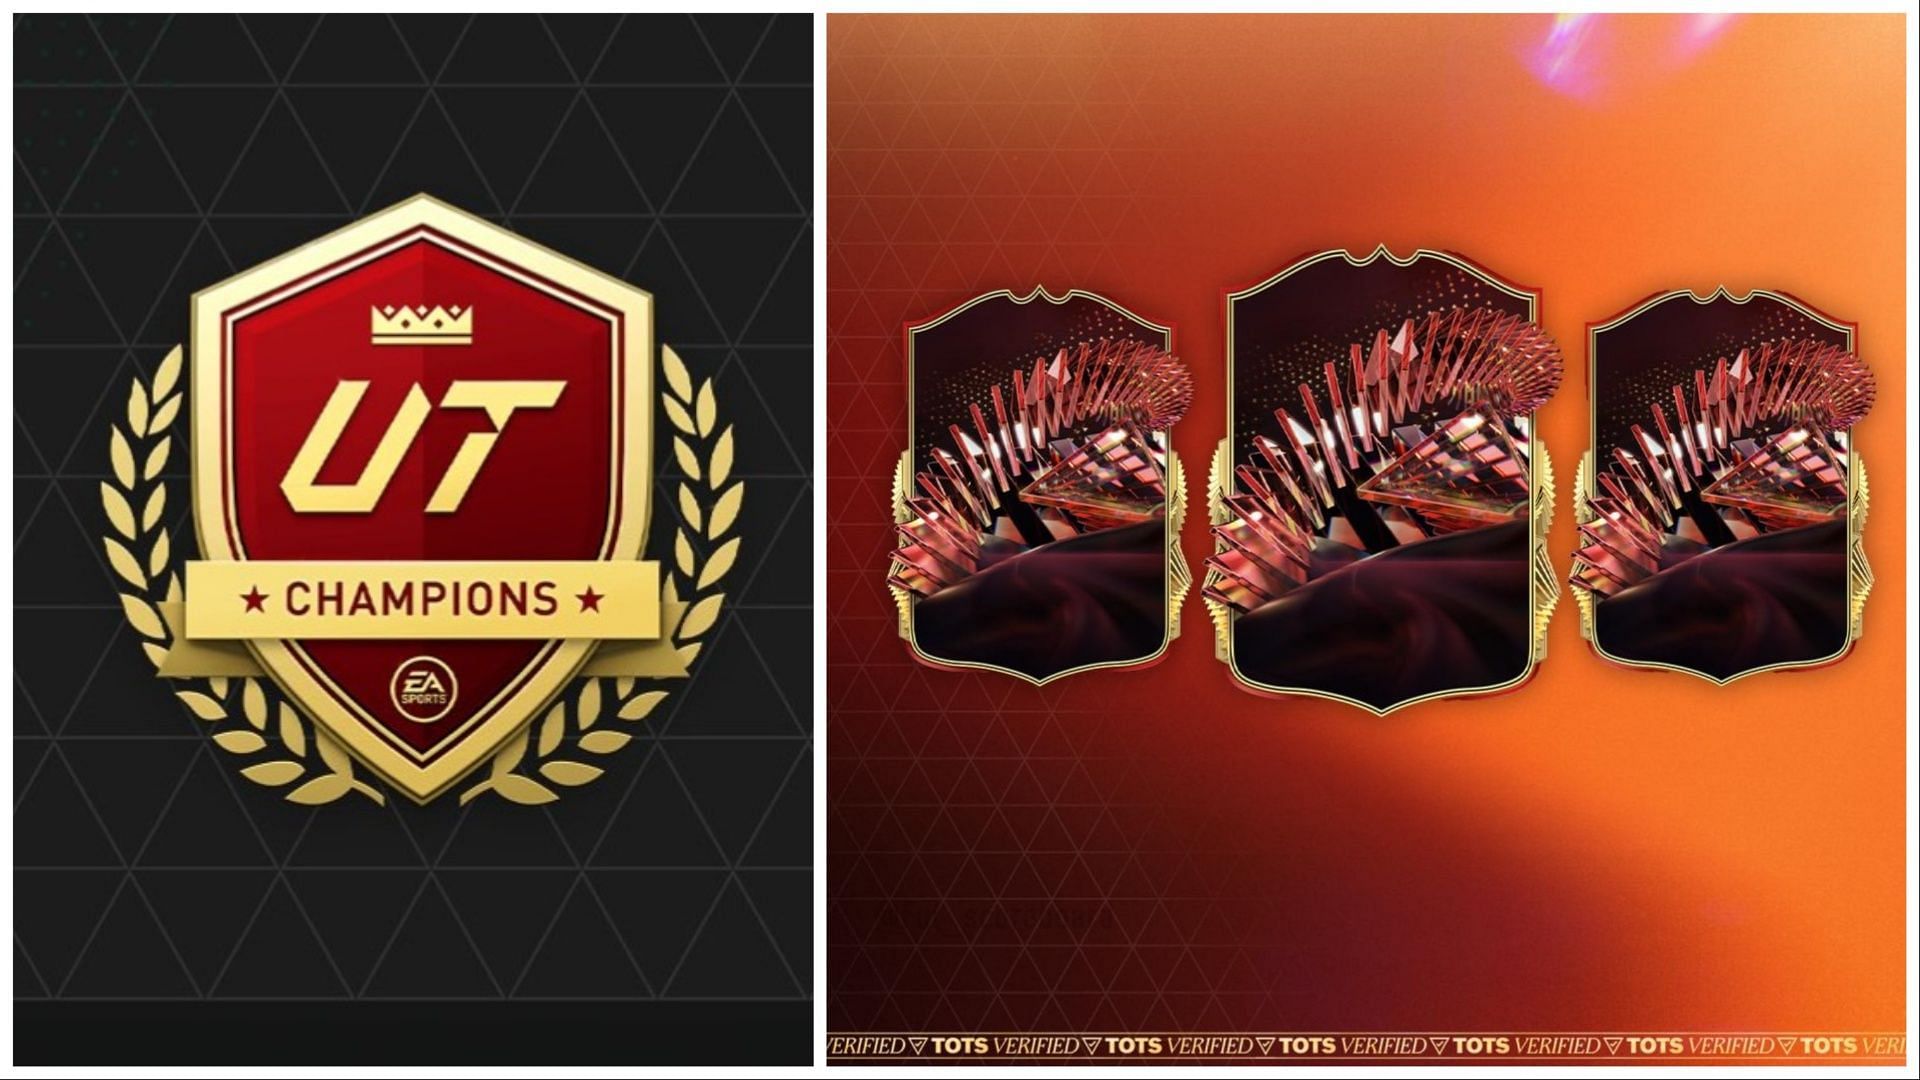 The new reward system has arrived (Images via EA Sports)